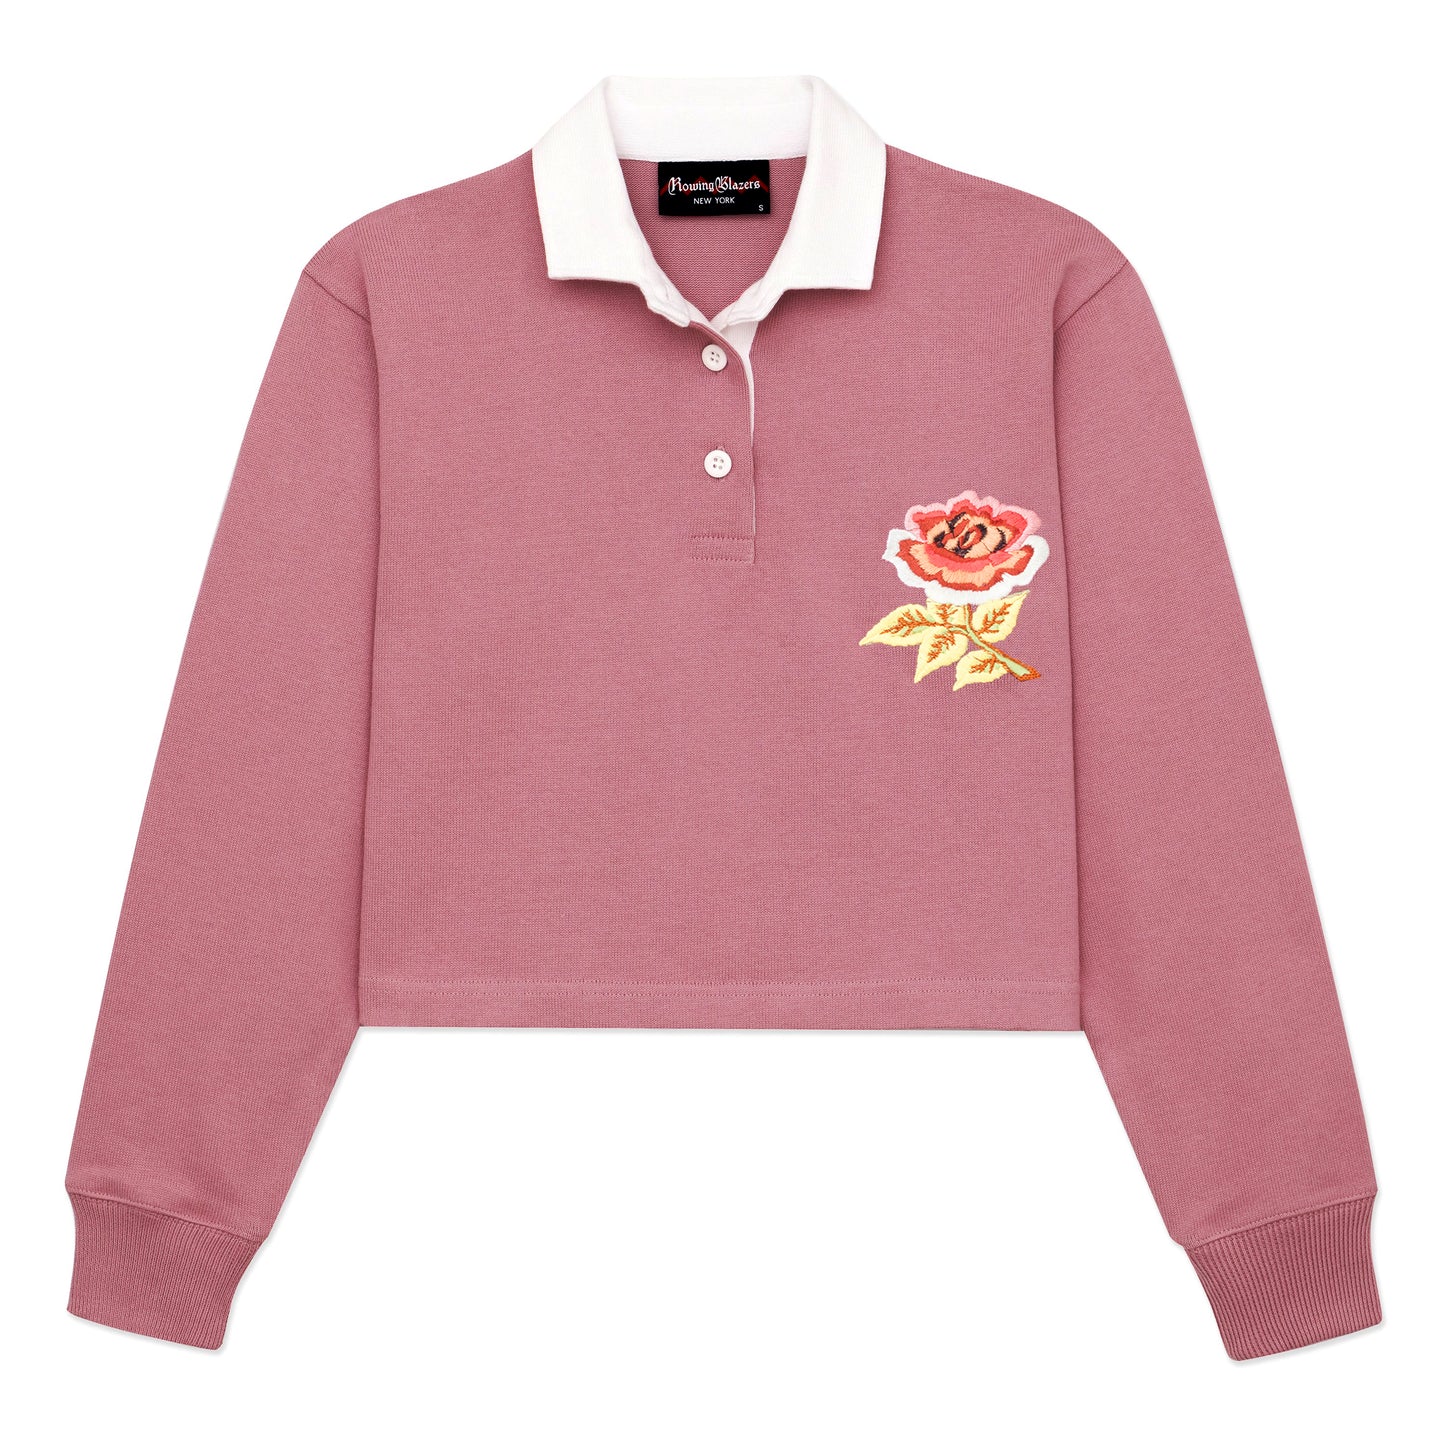 Pink cropped rugby jersey with an embroidered rose patch.